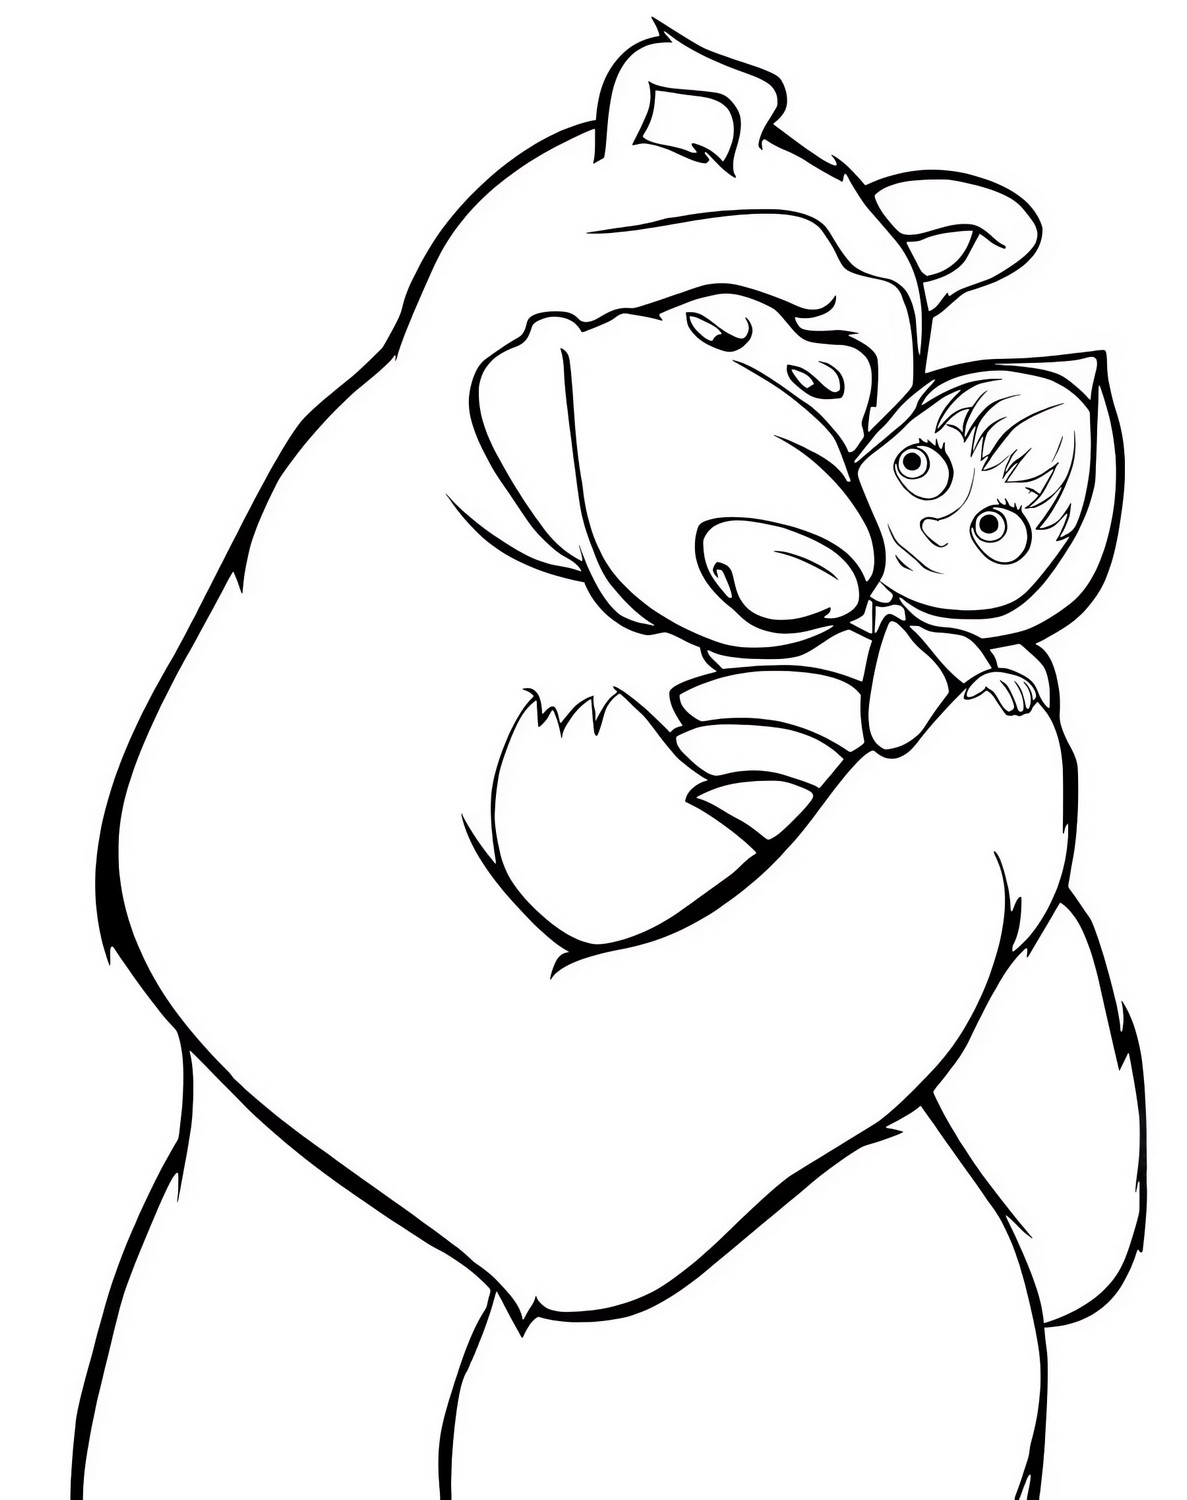 Masha and the Bear 55 drawing from Masha and the Bear to print and color